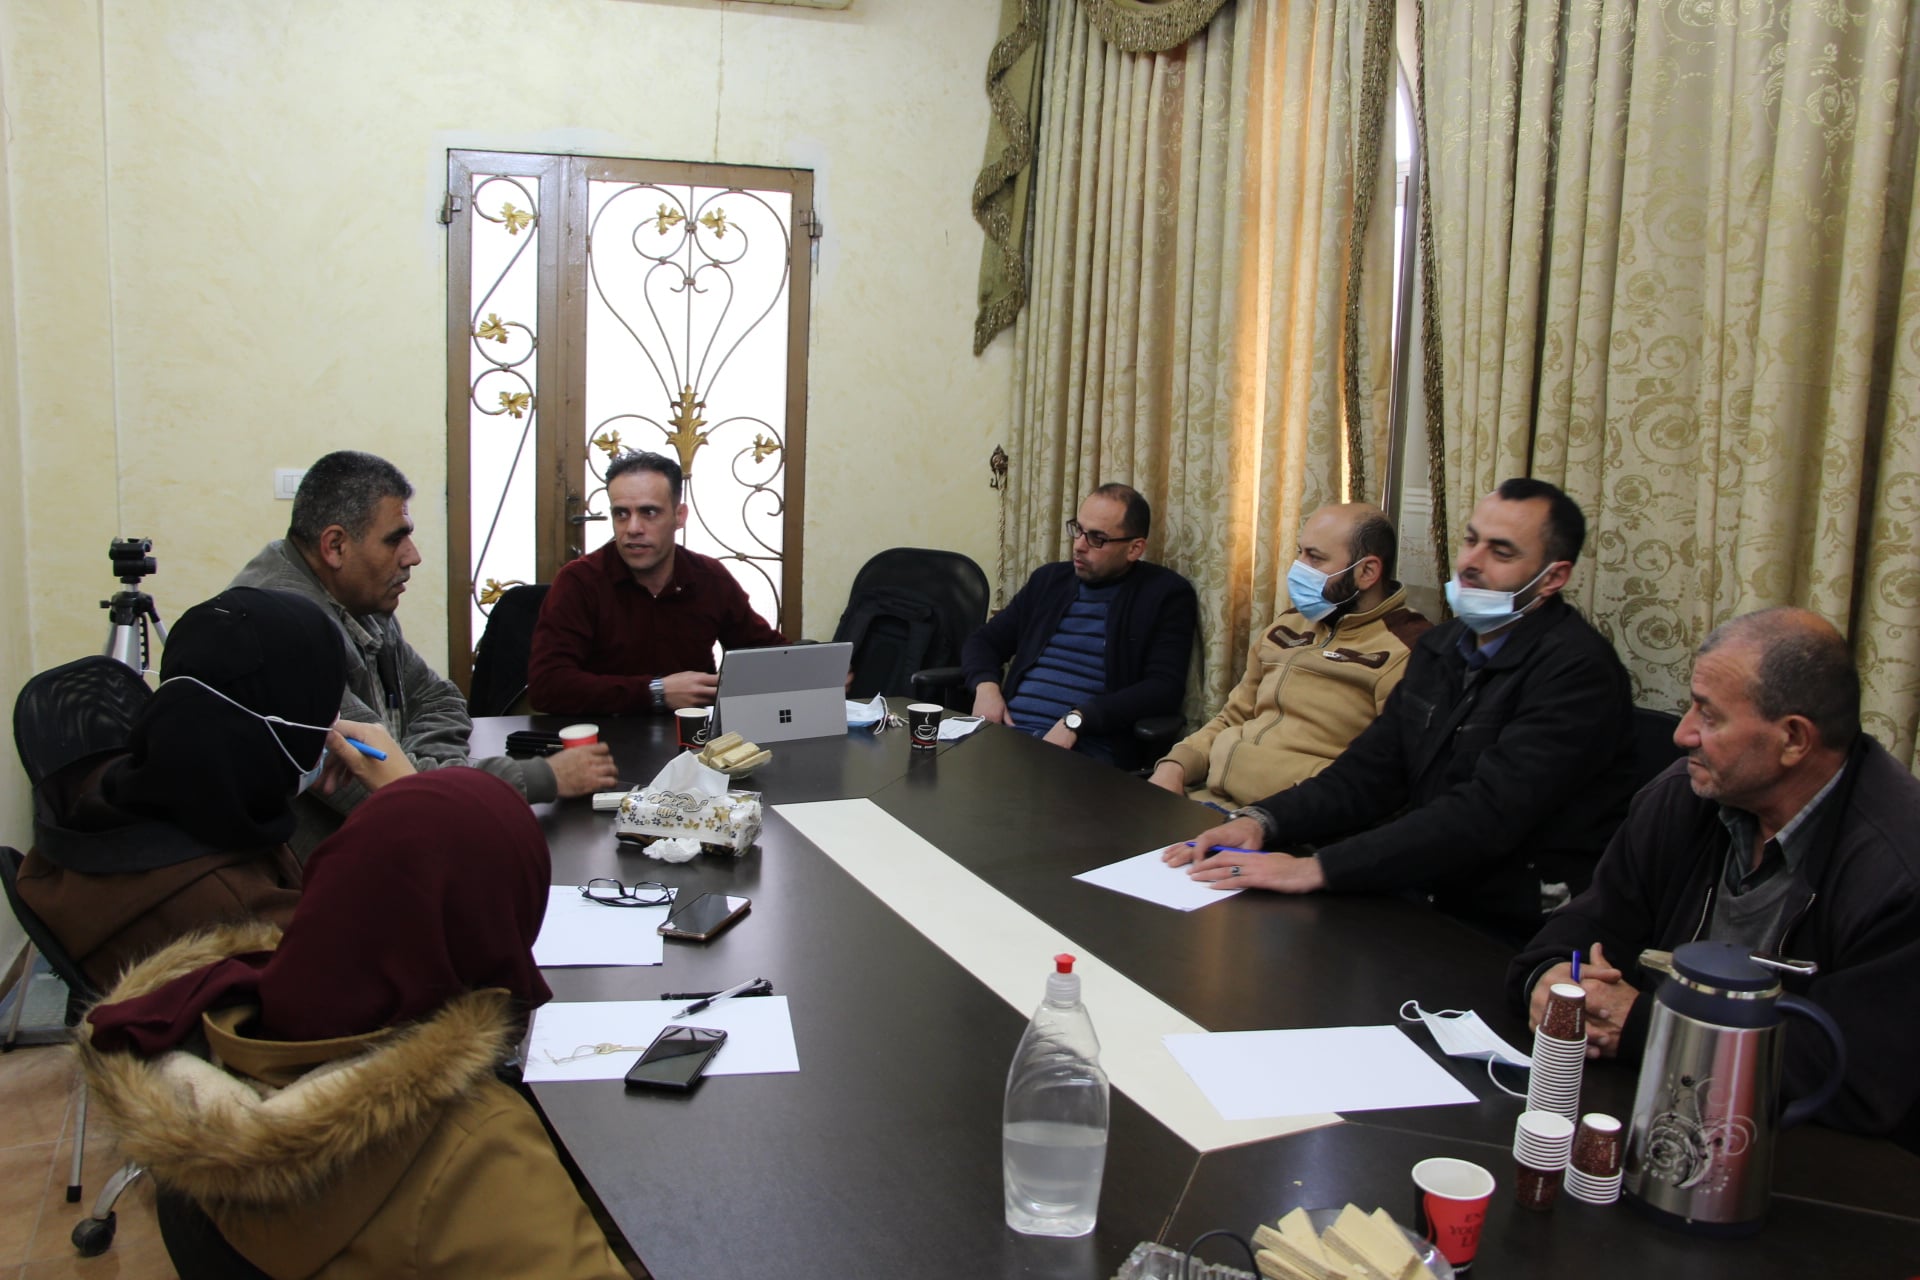  A digital training day for Jam’in Municipality in Nablus governorate